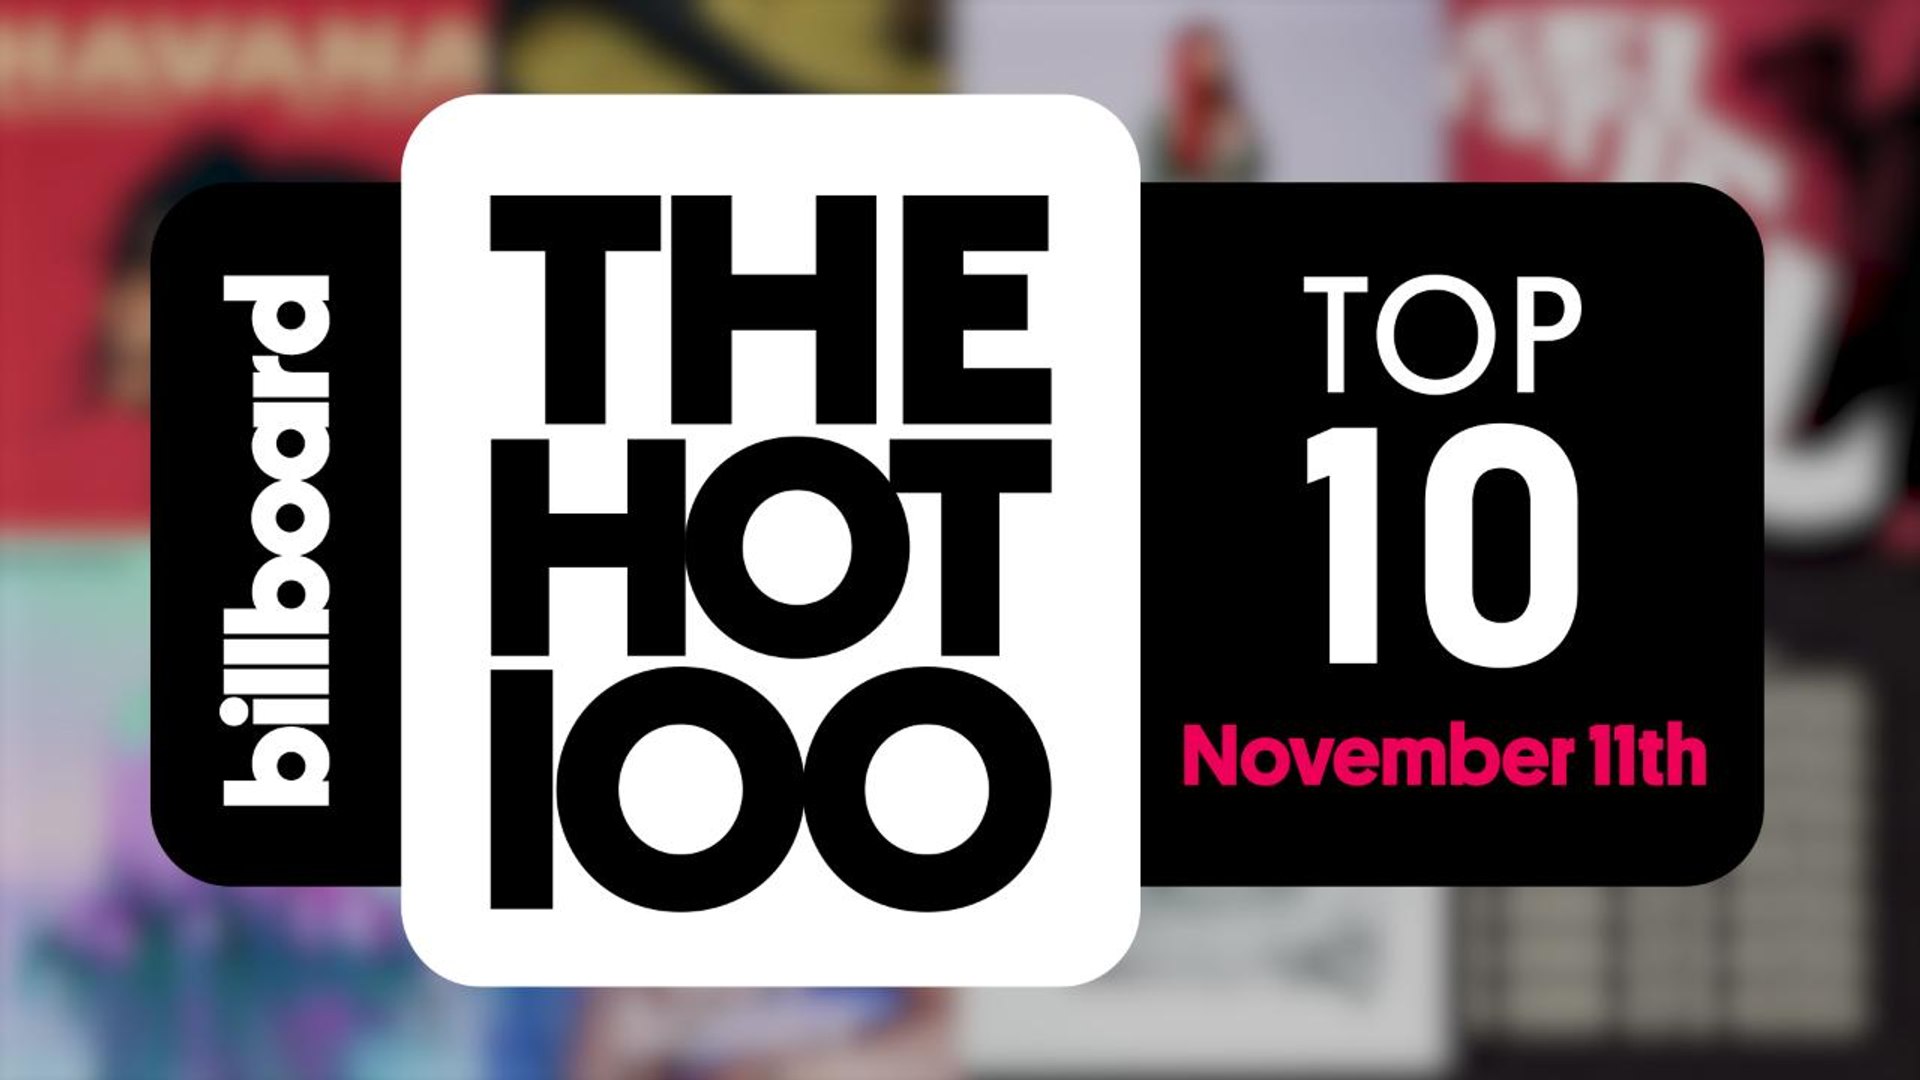 Early Release! Billboard Hot 100 Top 10 November 11th 2017 Countdown | Official